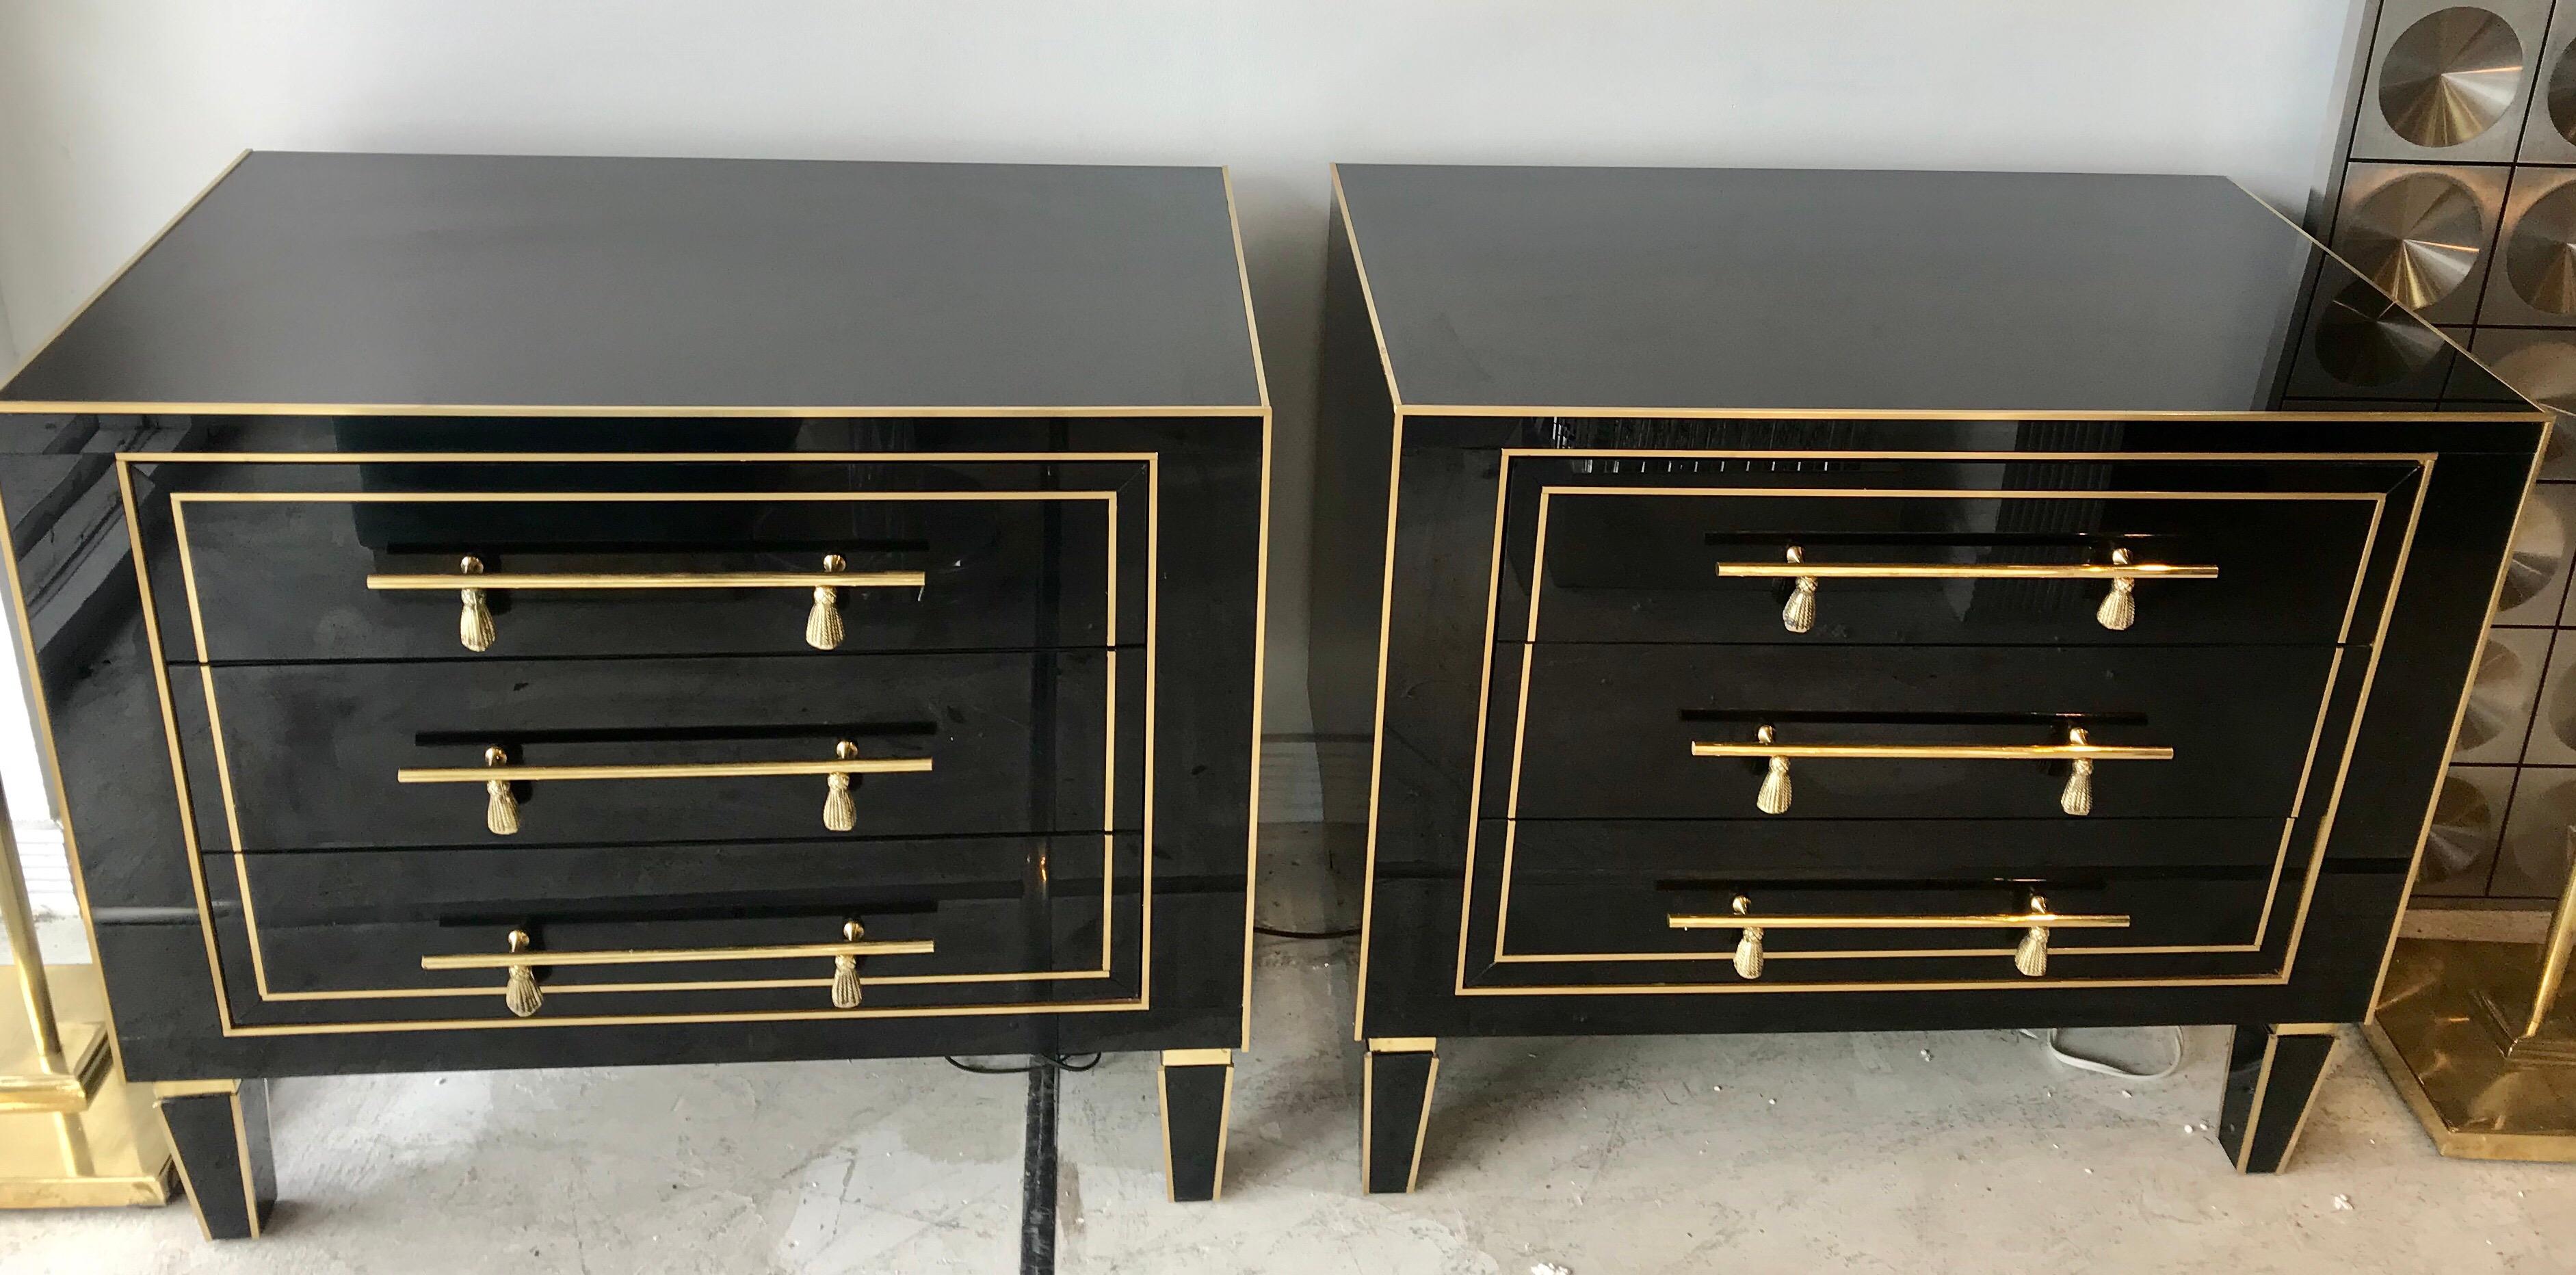 A fabulous pair of glamorous Italian black glass and brass side/ bed side chests with brass tassel pulls.